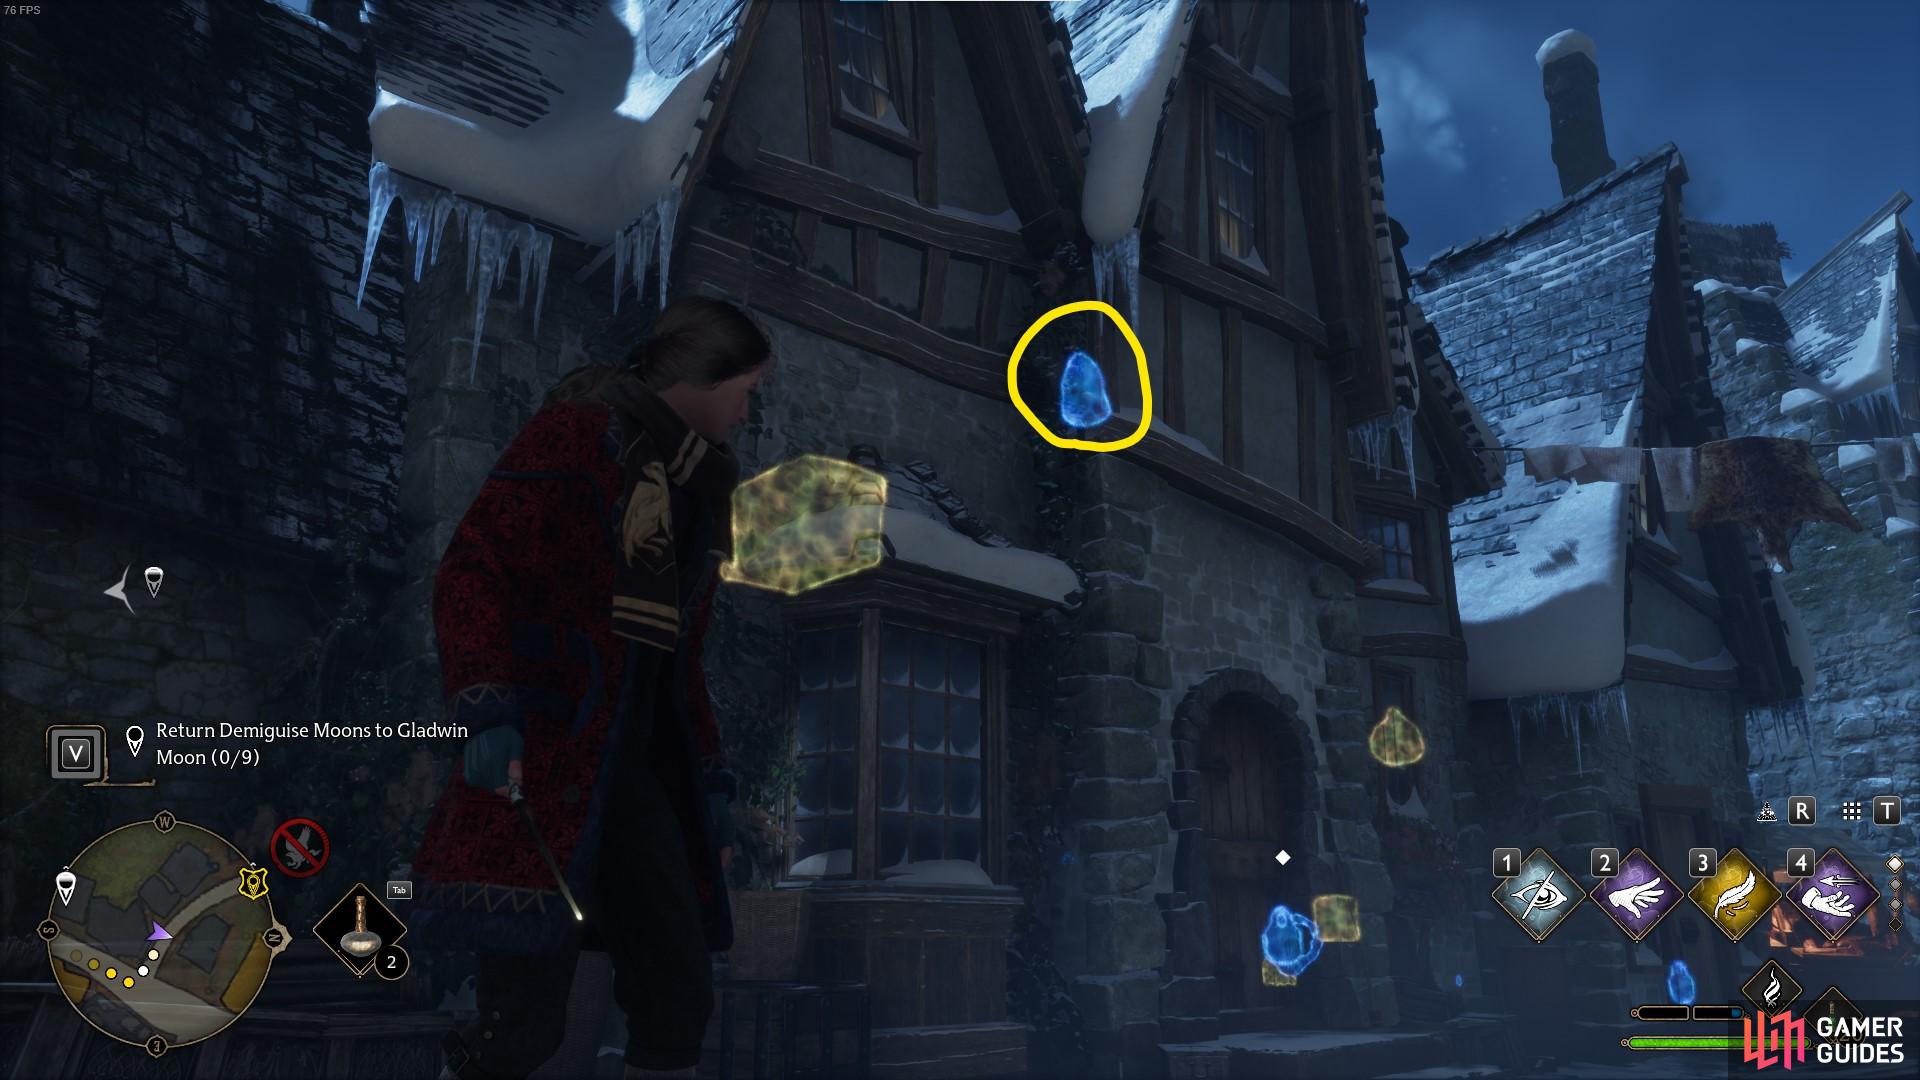 There's a level 2 locked house around the corner from the Tomes and Scrolls store.